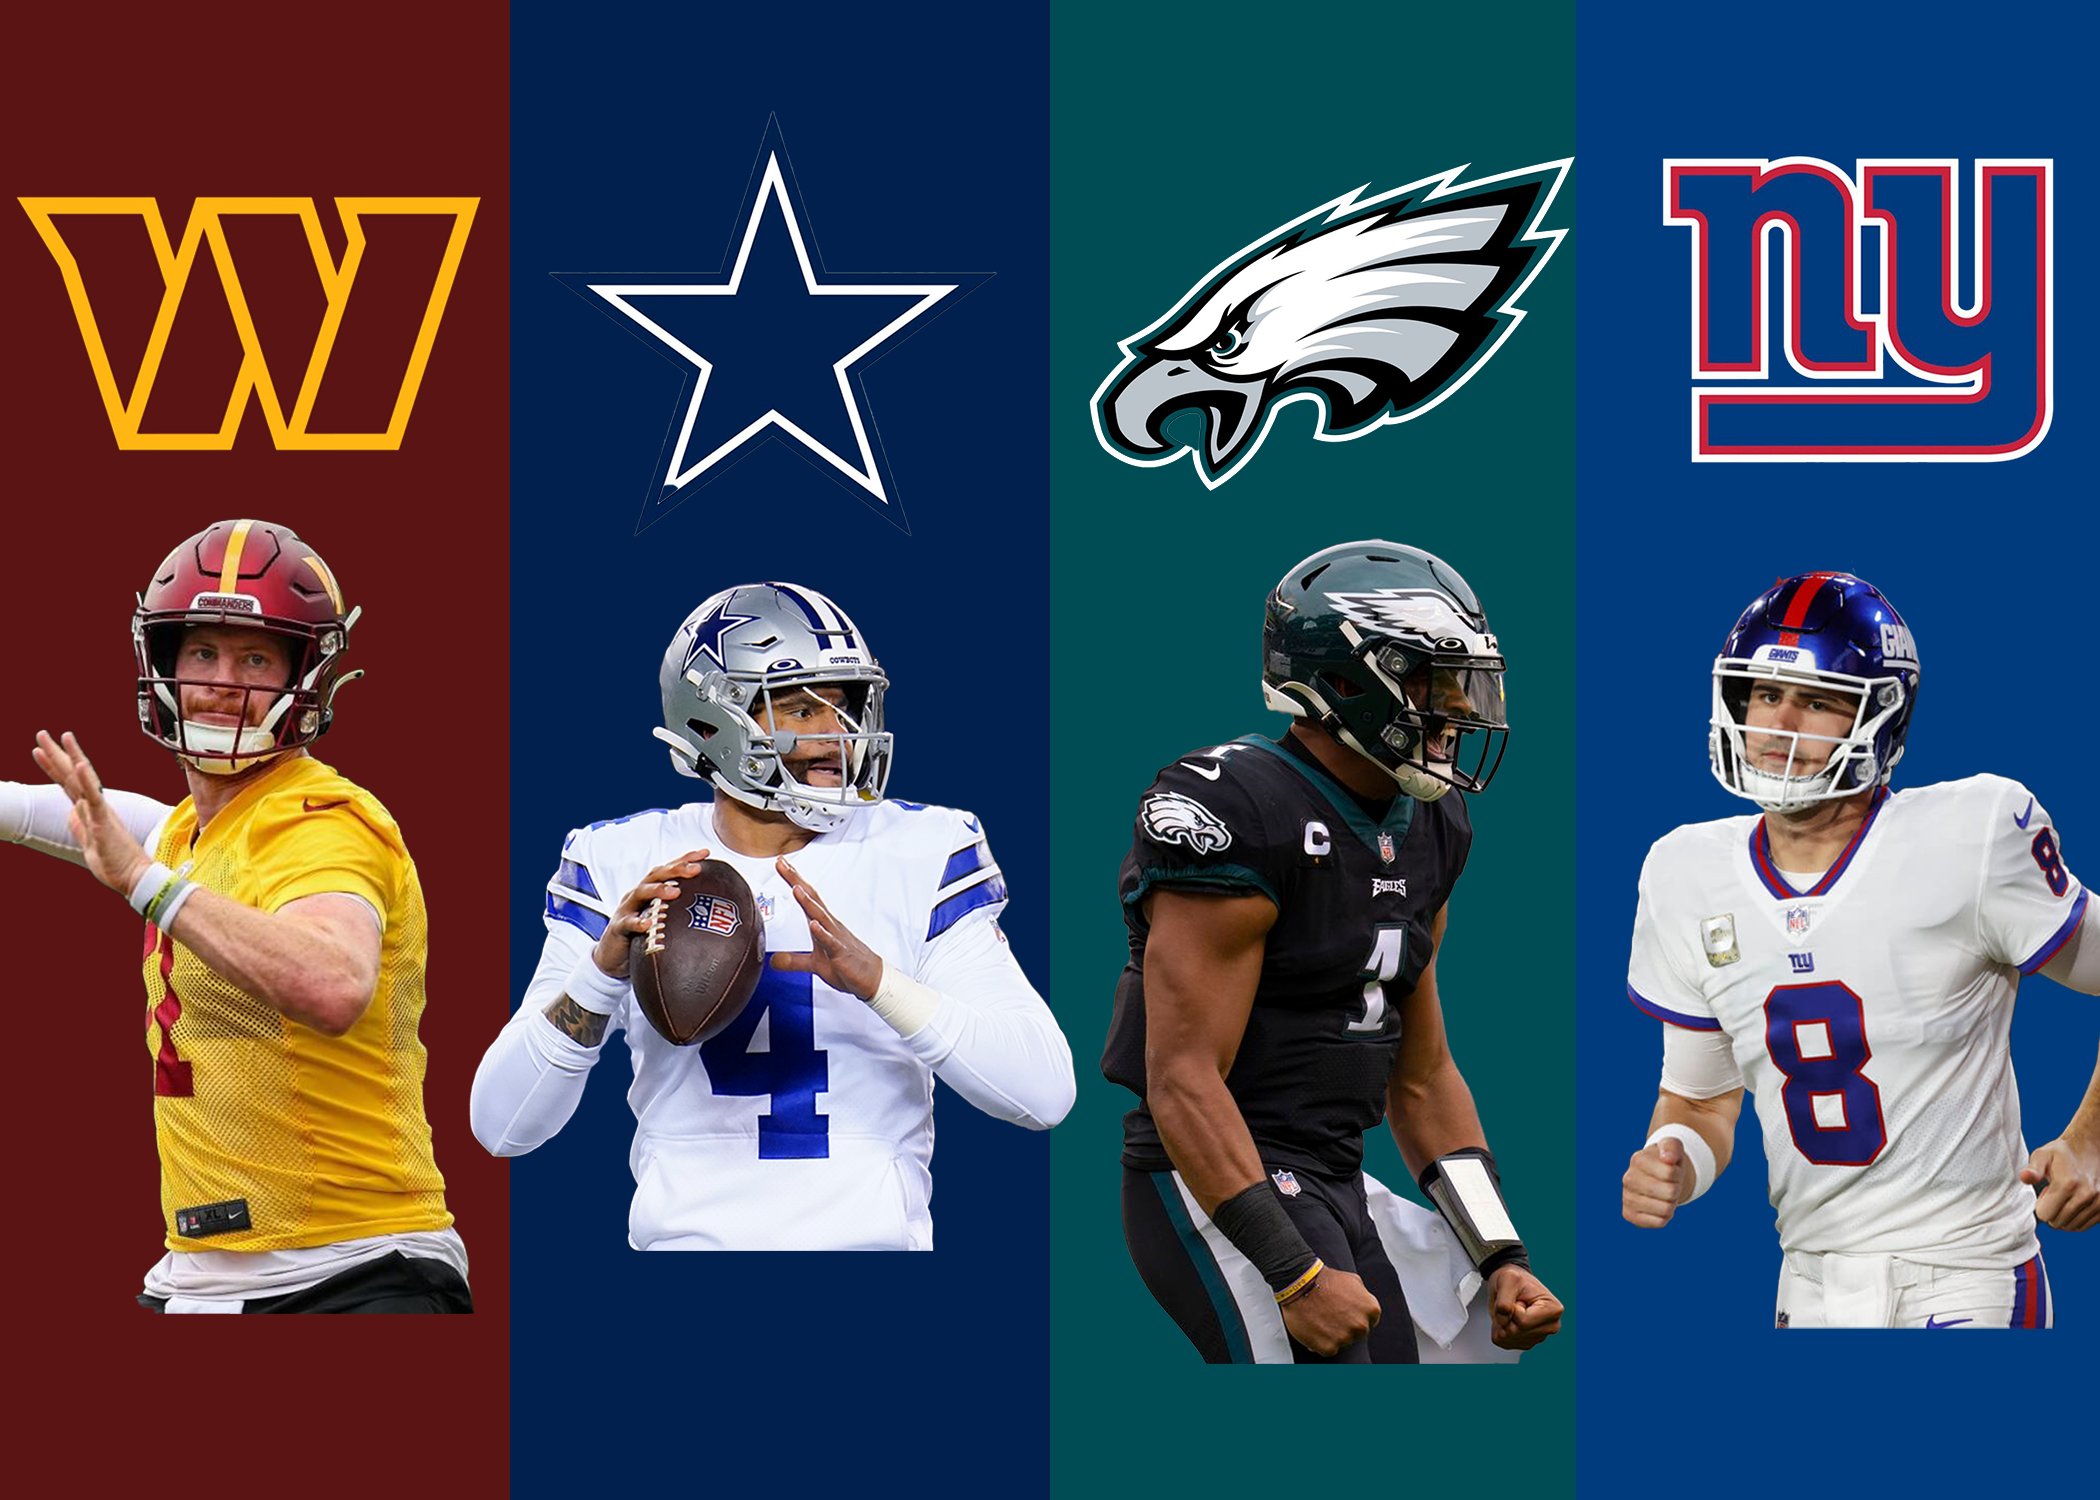 NFC East Preview: The NFL's Most Erratic Division - Belly Up Sports